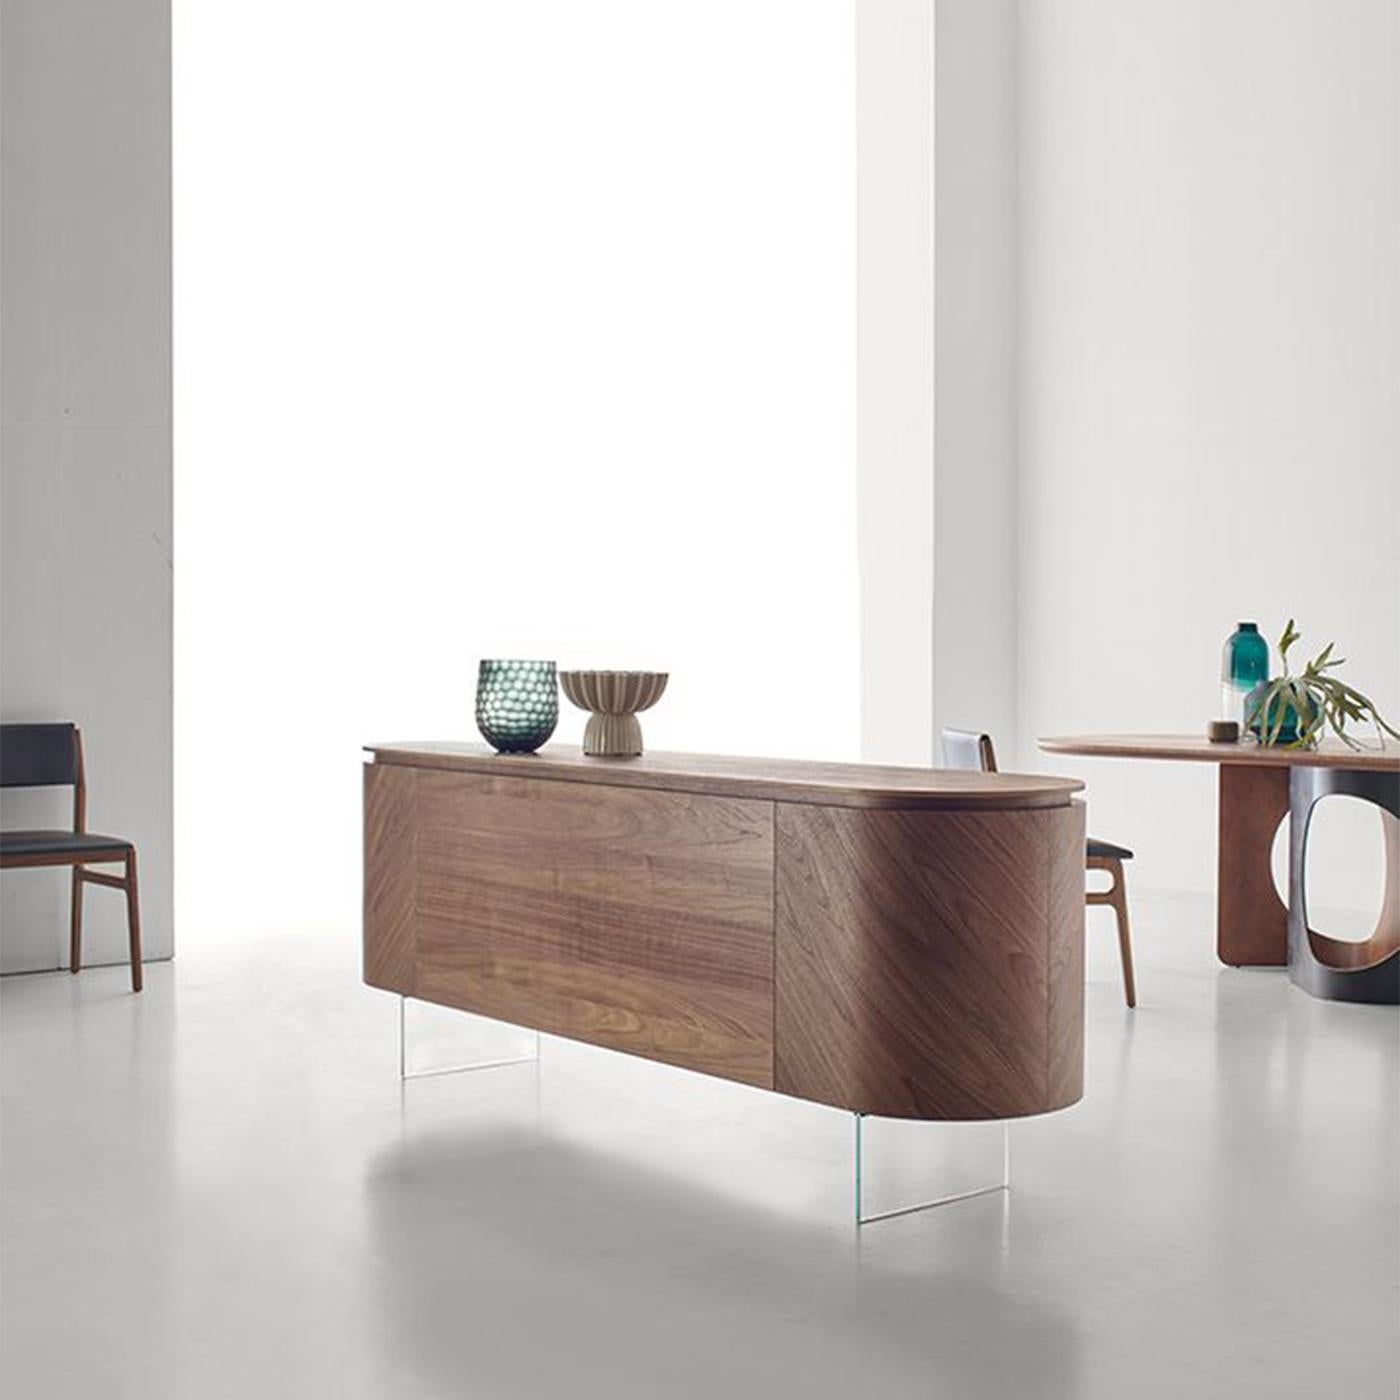 Enveloping curves trace the harmonious silhouette of this exclusive sideboard seemingly floating on its tempered glass feet. Entirely fashioned of prized Canaletto walnut enhanced by a dynamic herringbone veneer, it is equipped with four doors whose